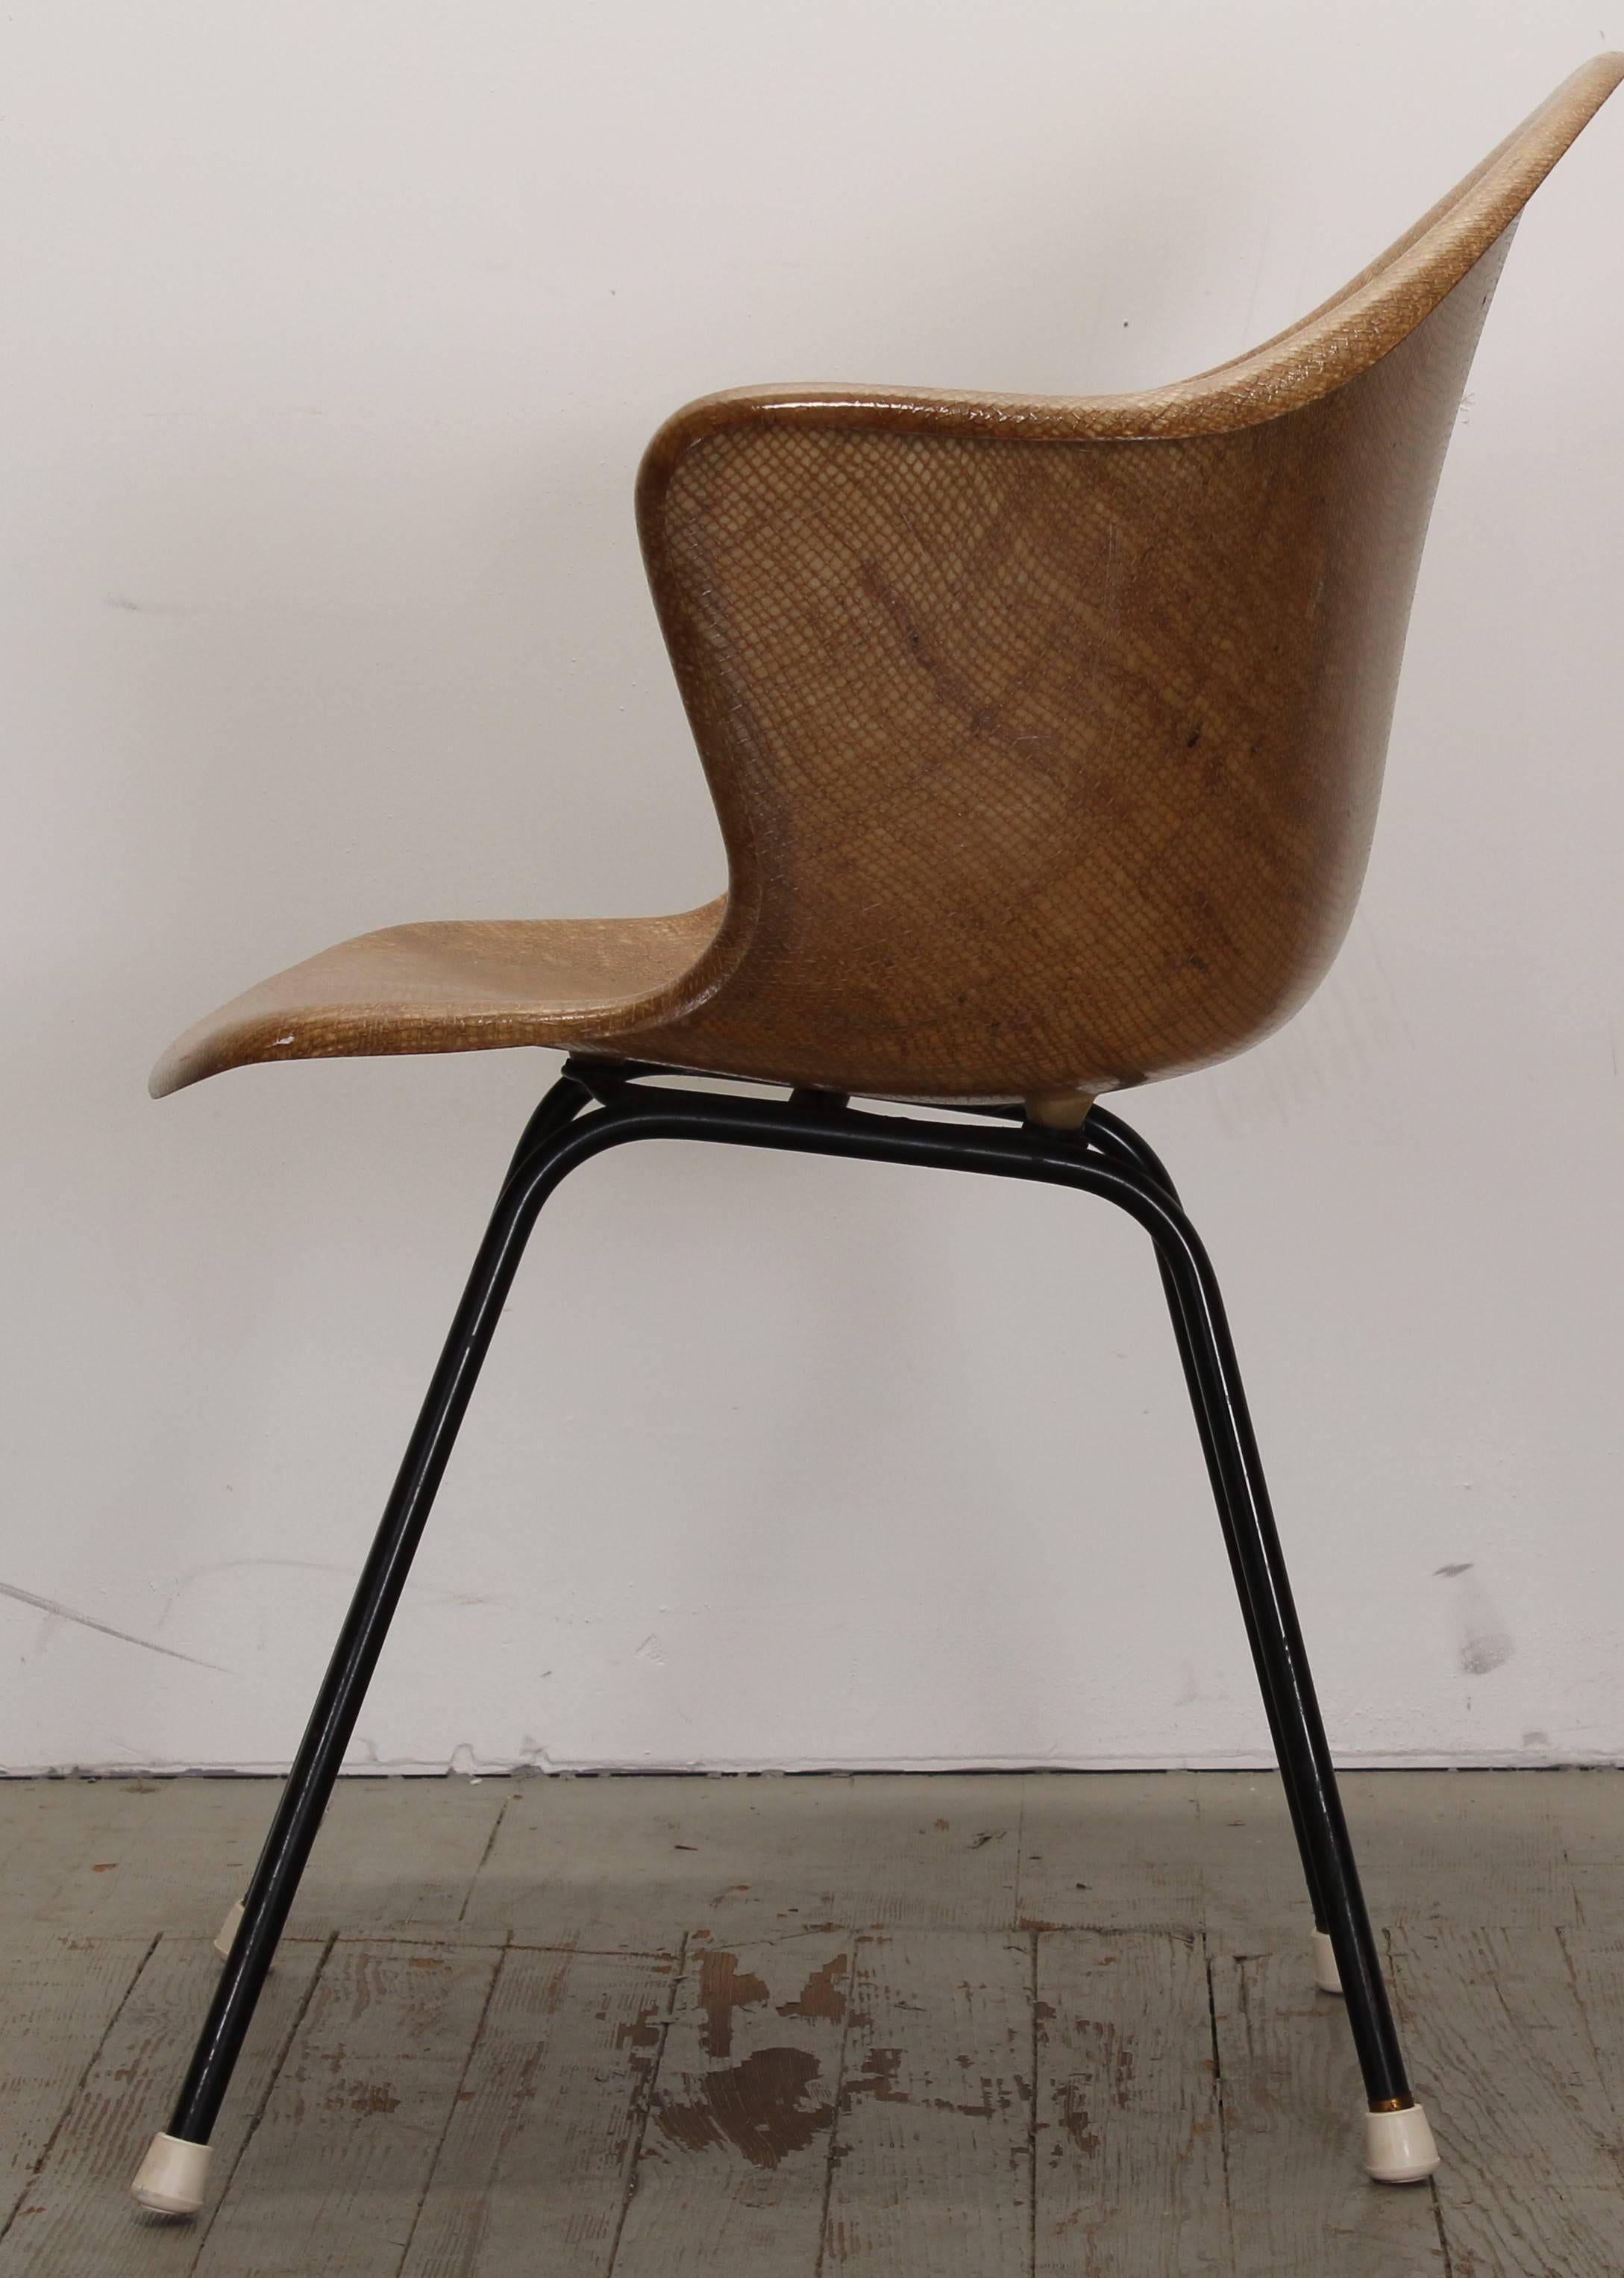 A great Mid-Century Modern armchair attributed to Luther Conover. The shell has a burlap design which was molded into the fiberglass. The chair is a light brown to golden wheat color accented by black metal legs. The feet are not original.